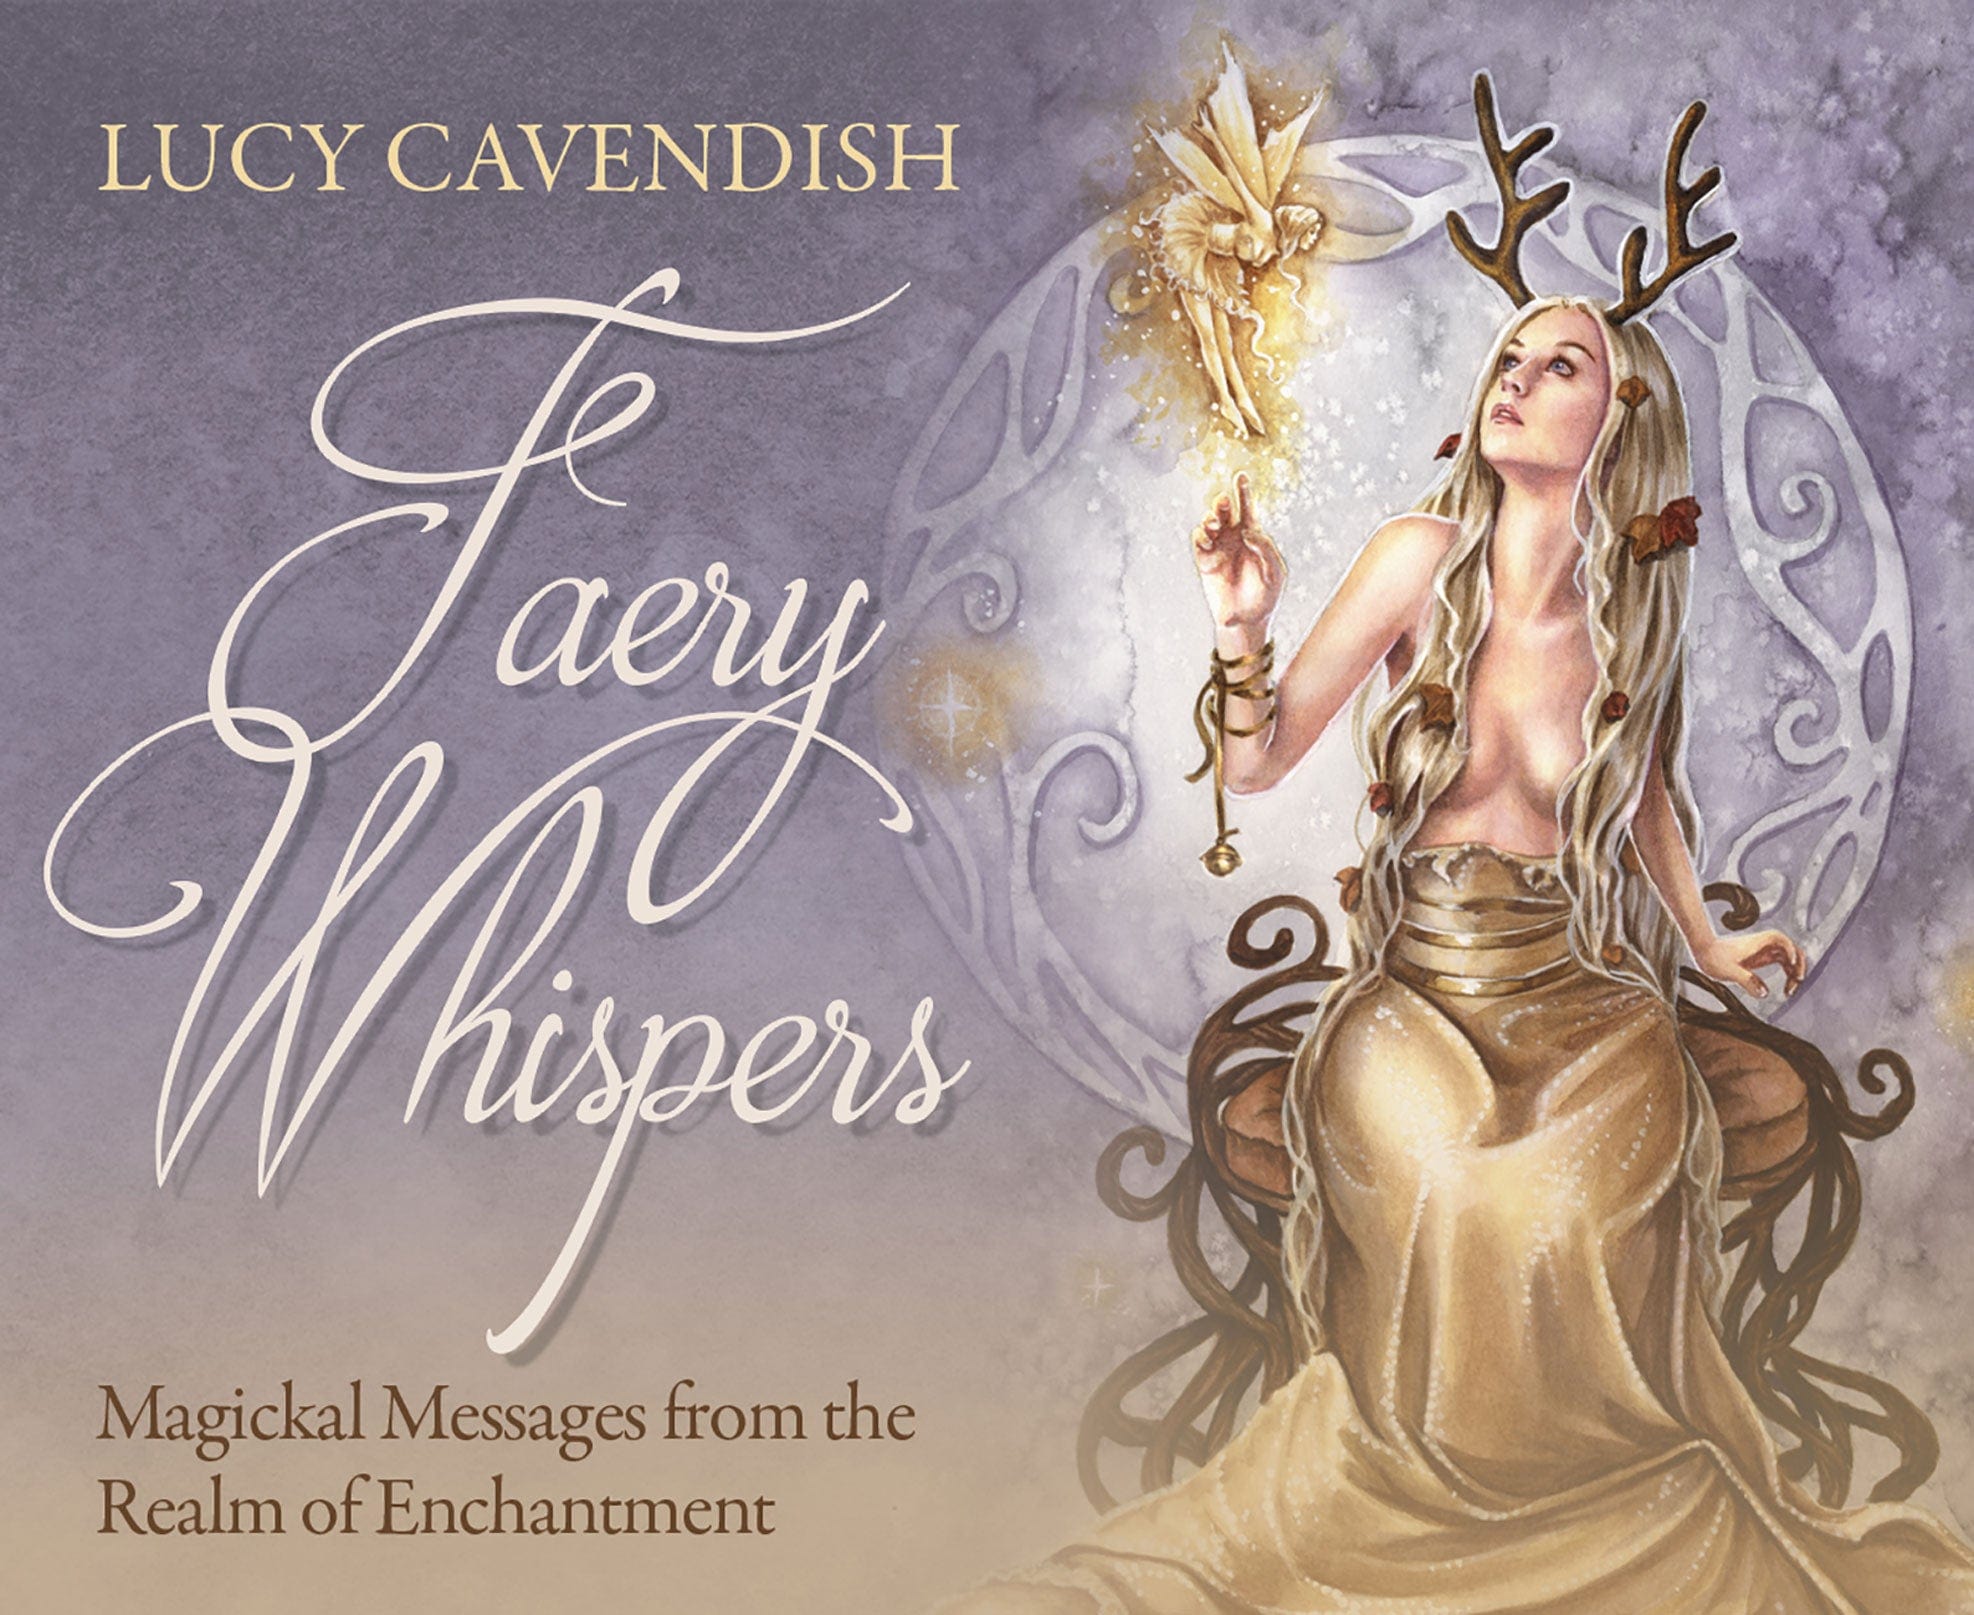 Faery Whispers Oracle Cards: Magickal Messages from the Realm of Enchantment by Lucy Cavendish